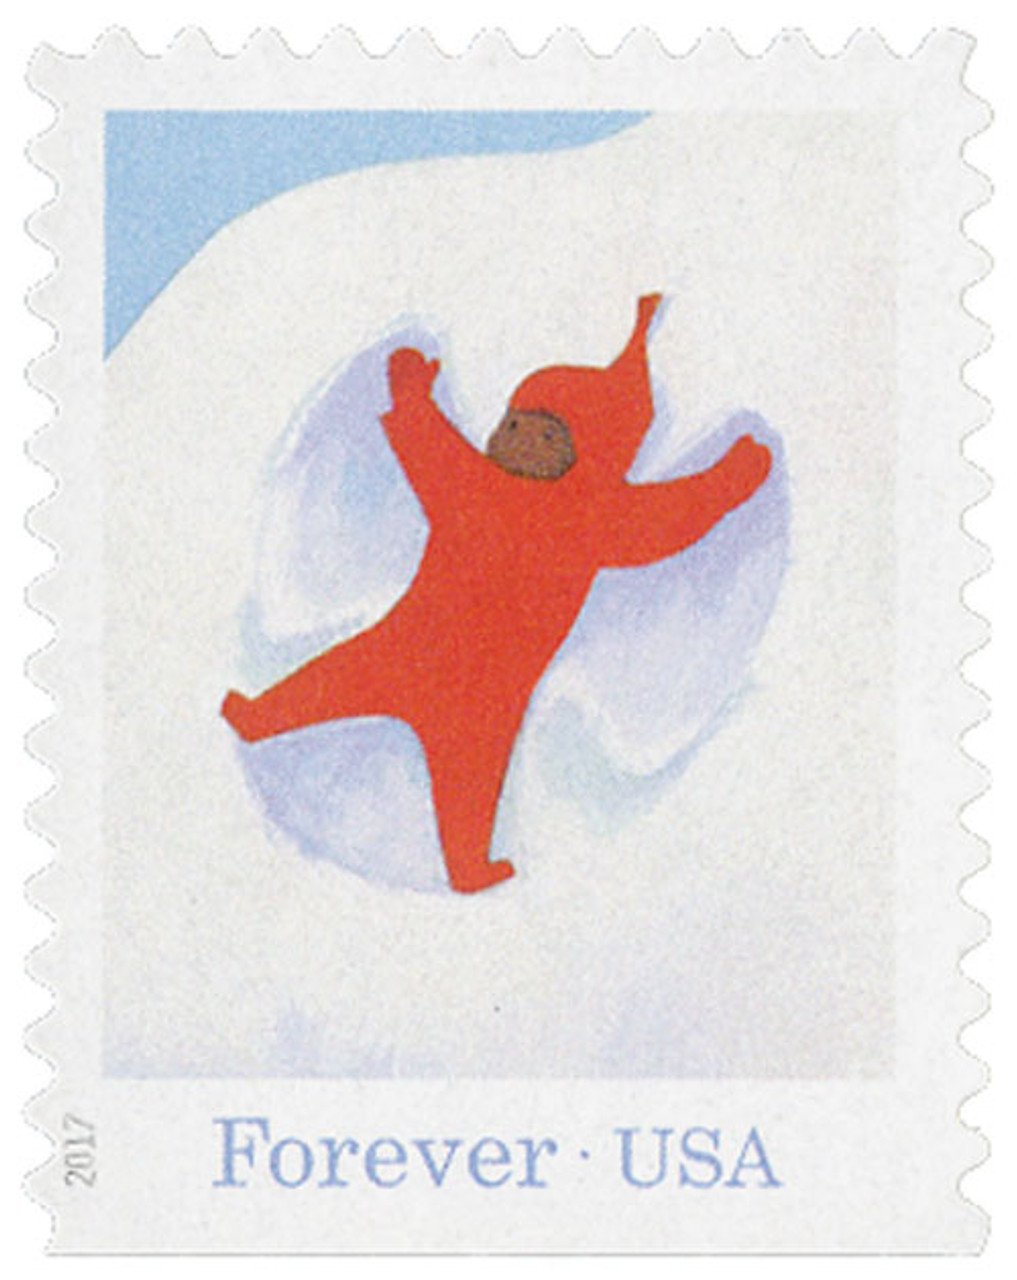 THE SNOWY DAY Forever Stamps to be Issued on October 4